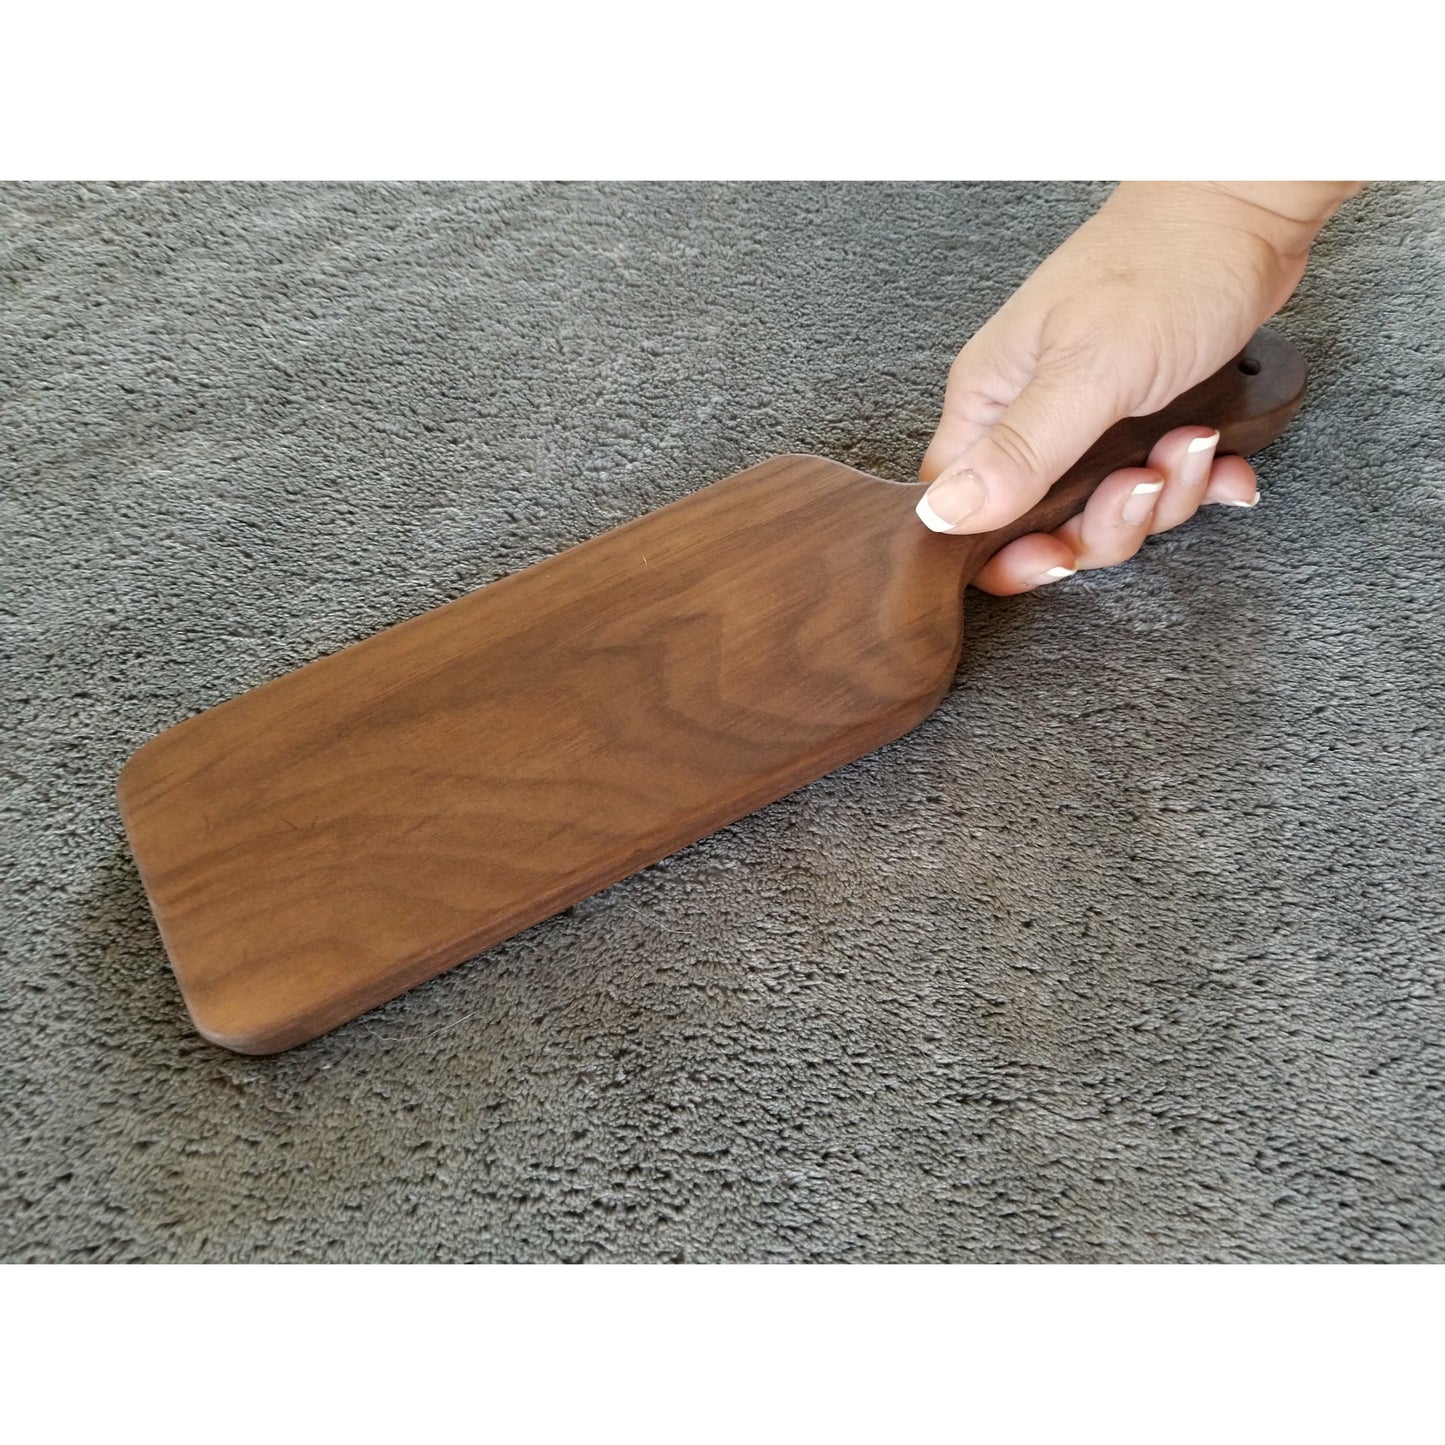 Unique wood spanking paddle with shark's tooth blade